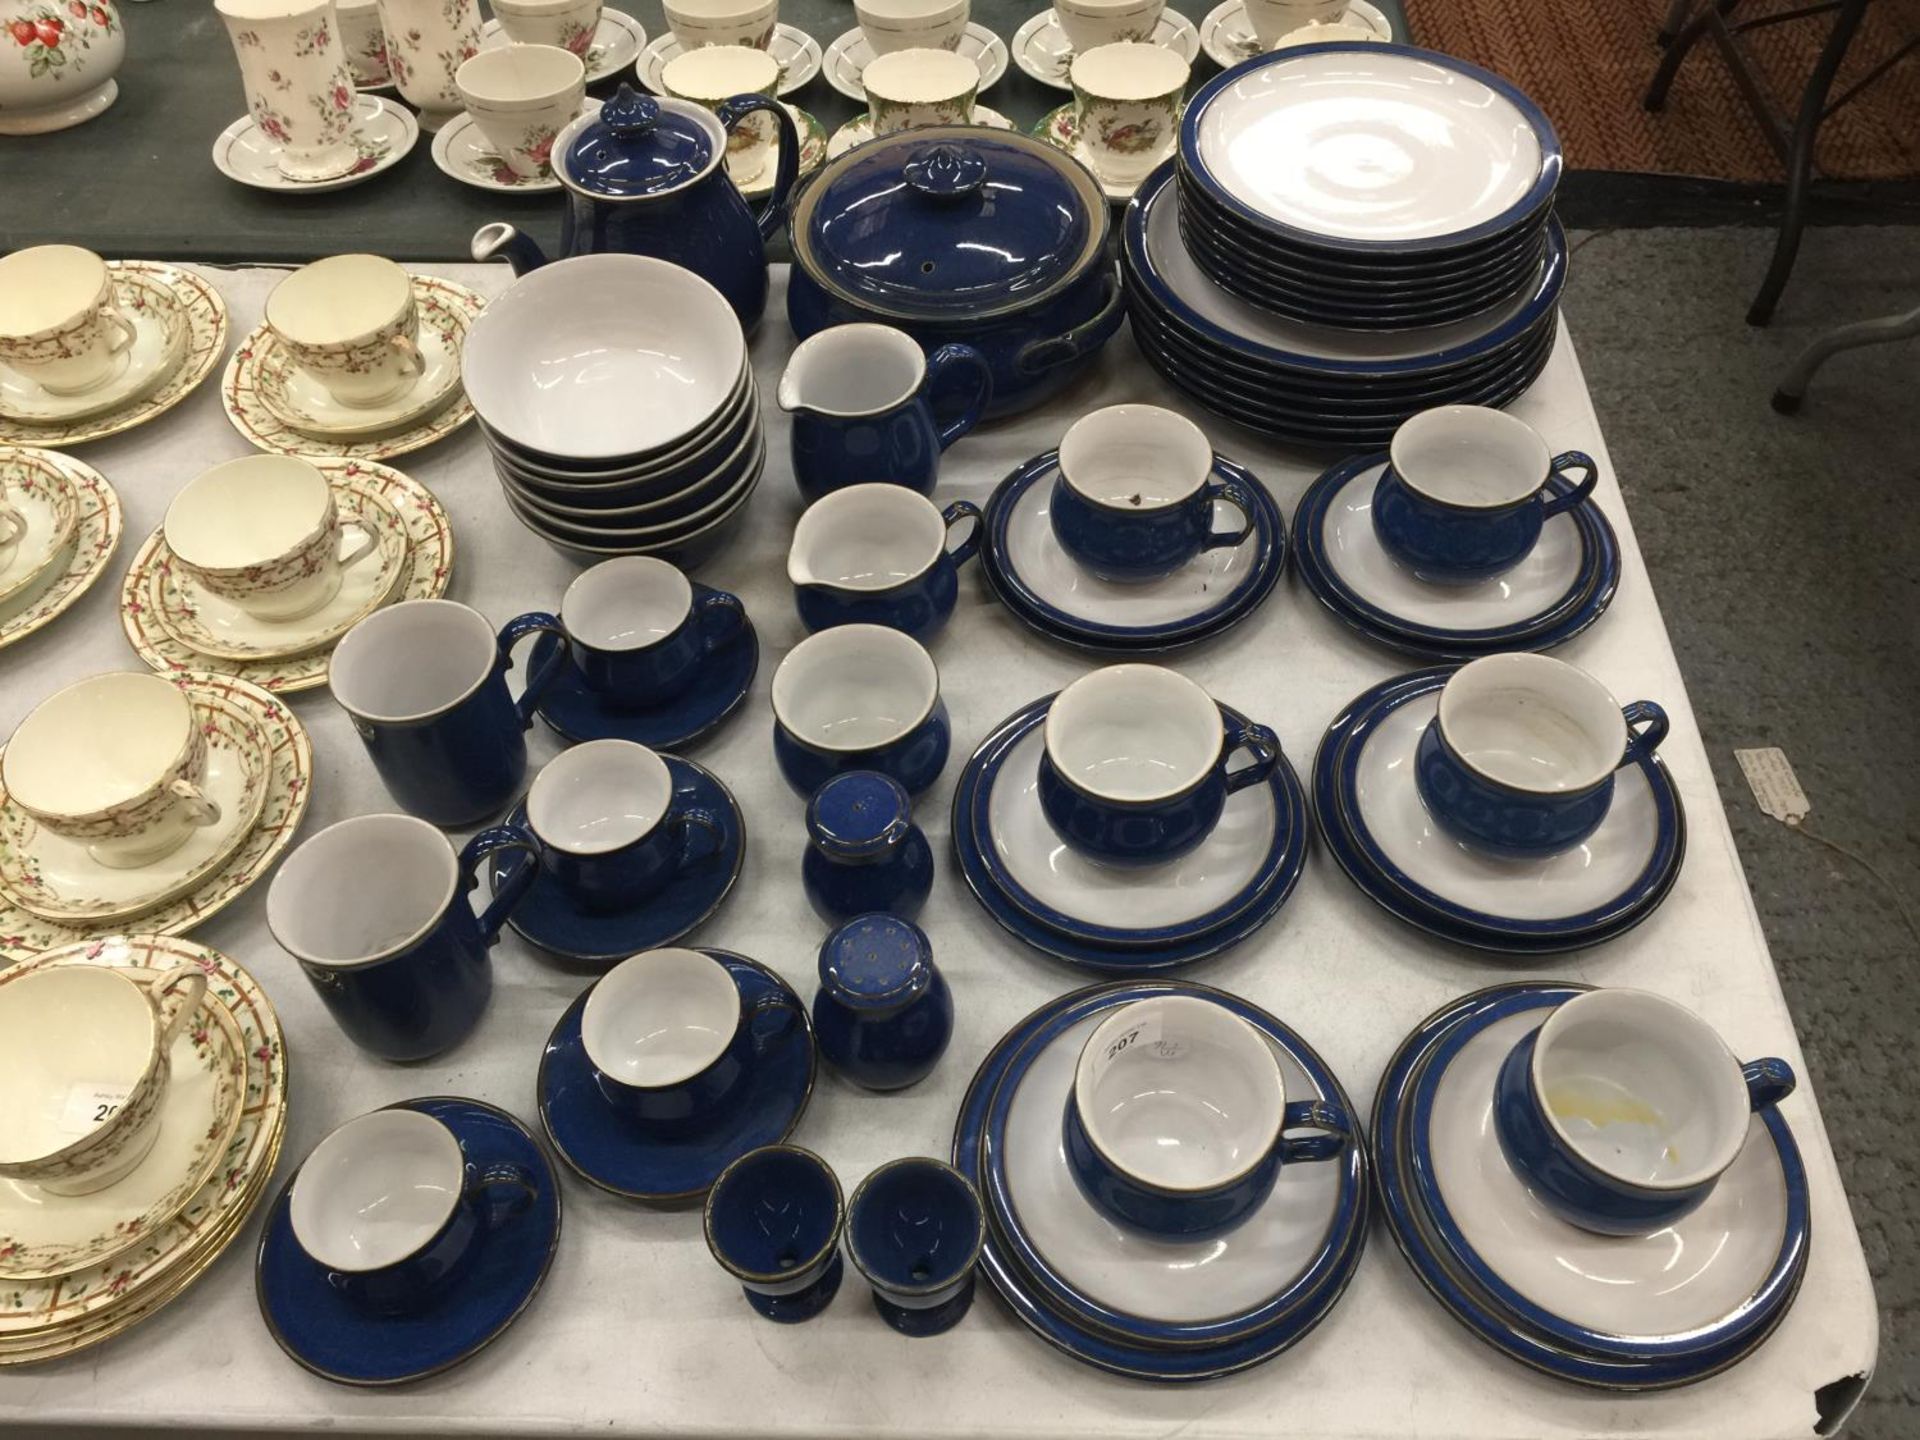 A DENBY DINNER SERVICE IN BLUE TO INCLUDE PLATES, BOWLS, TEAPOTS, SERVING TUREEN, MILK JUGS, SUGAR